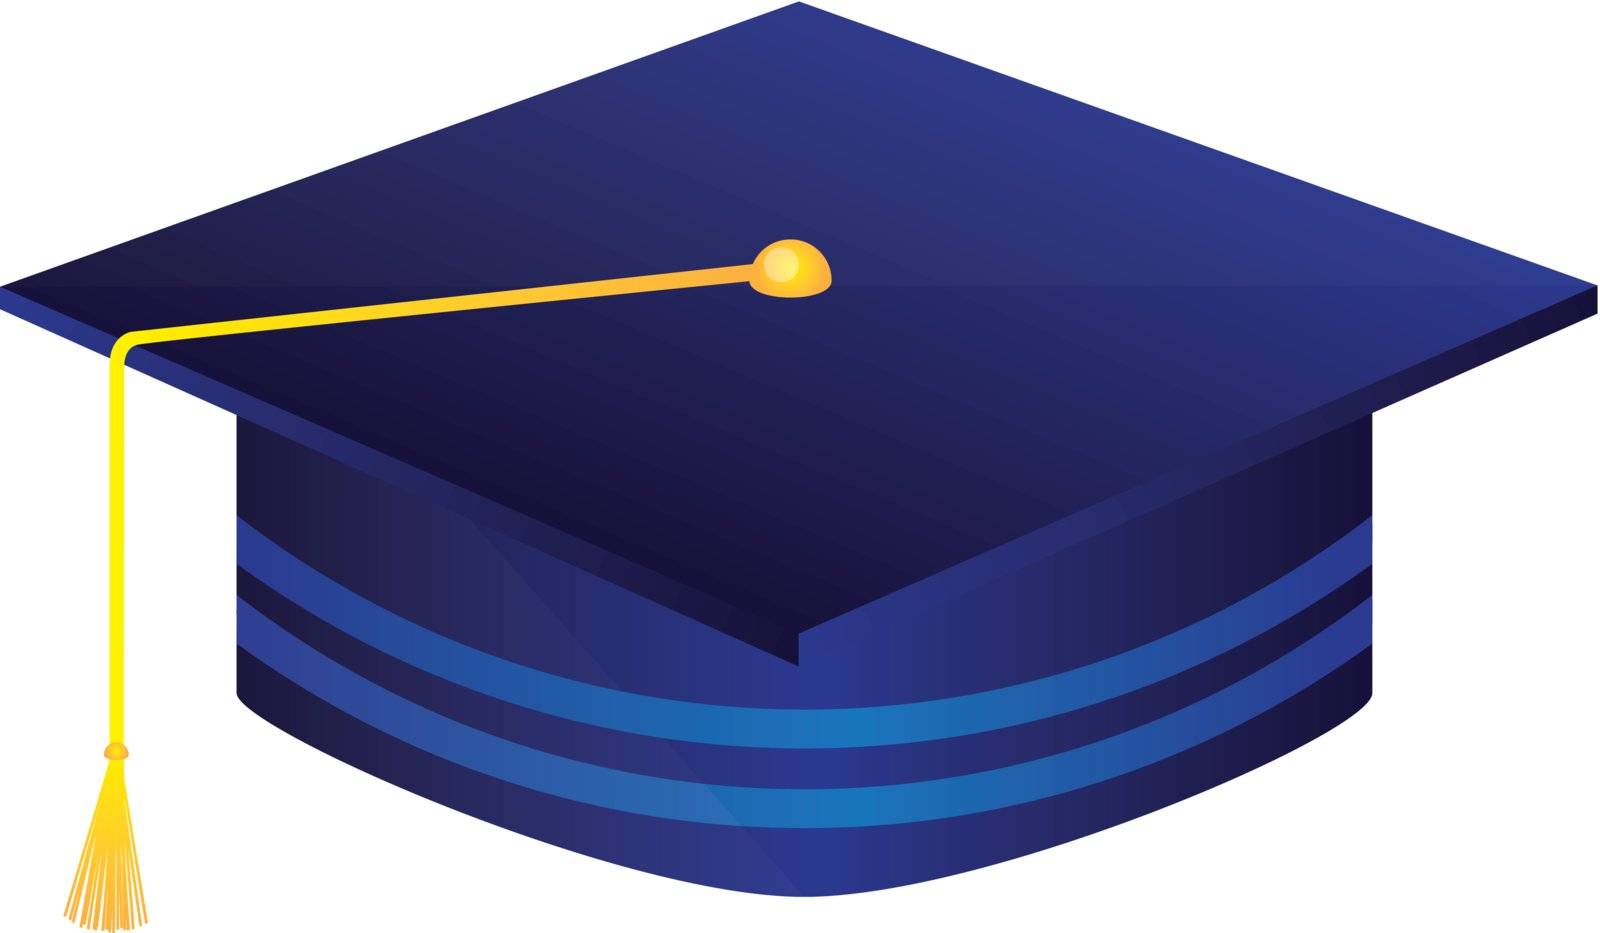 blue graduate hat isolated over white background. vector illustration